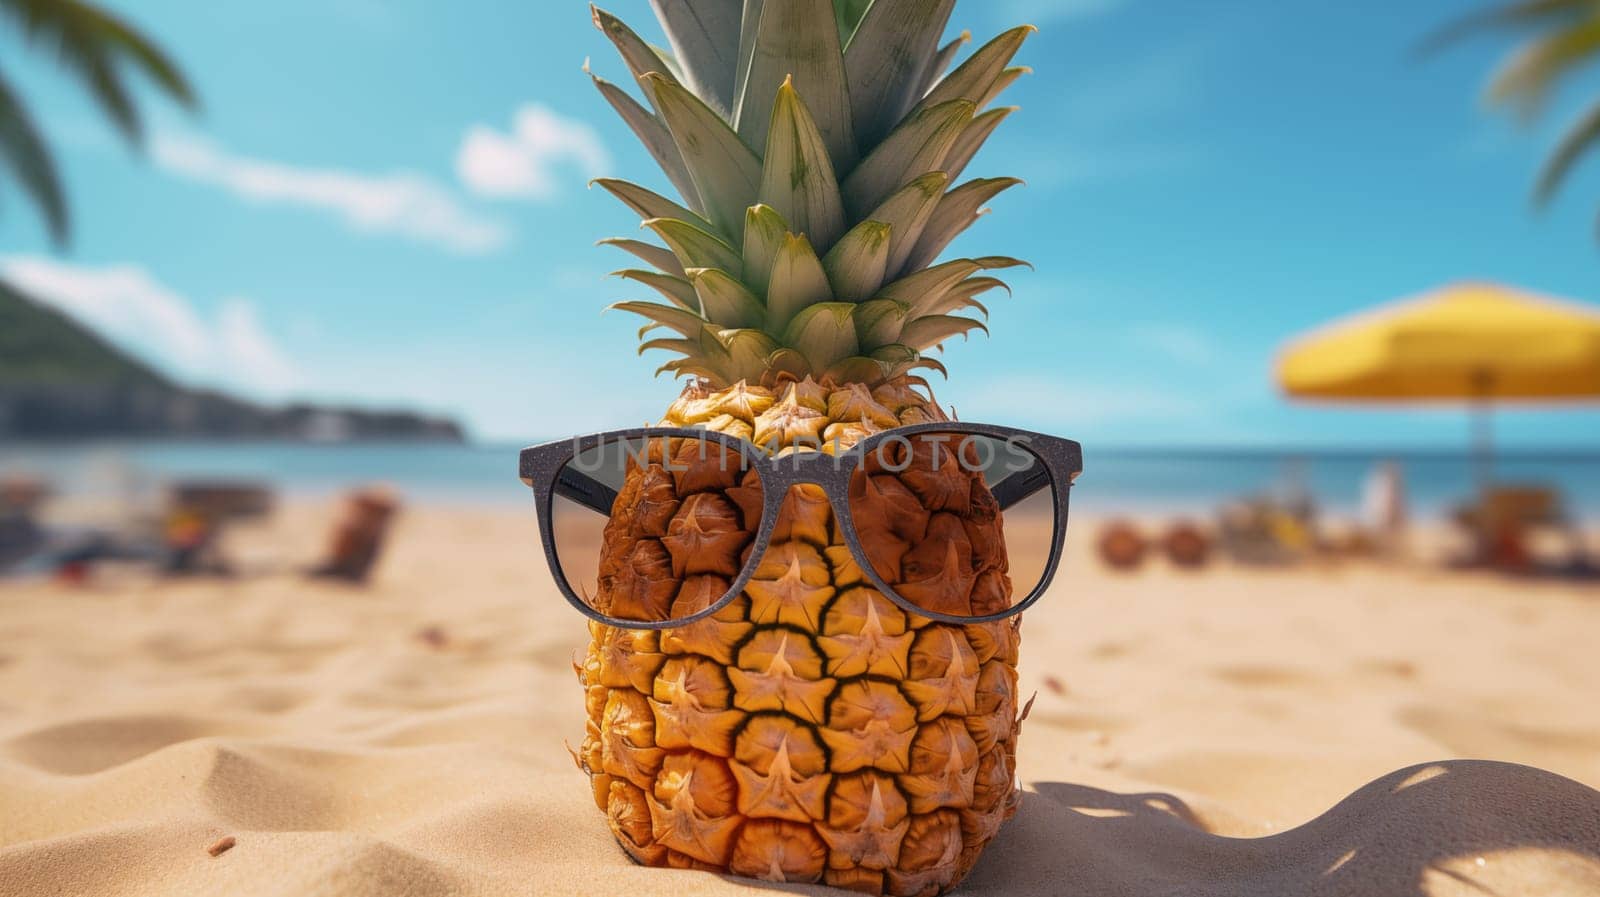 Cute Pineapple With Sunglasses stand In The Beach.